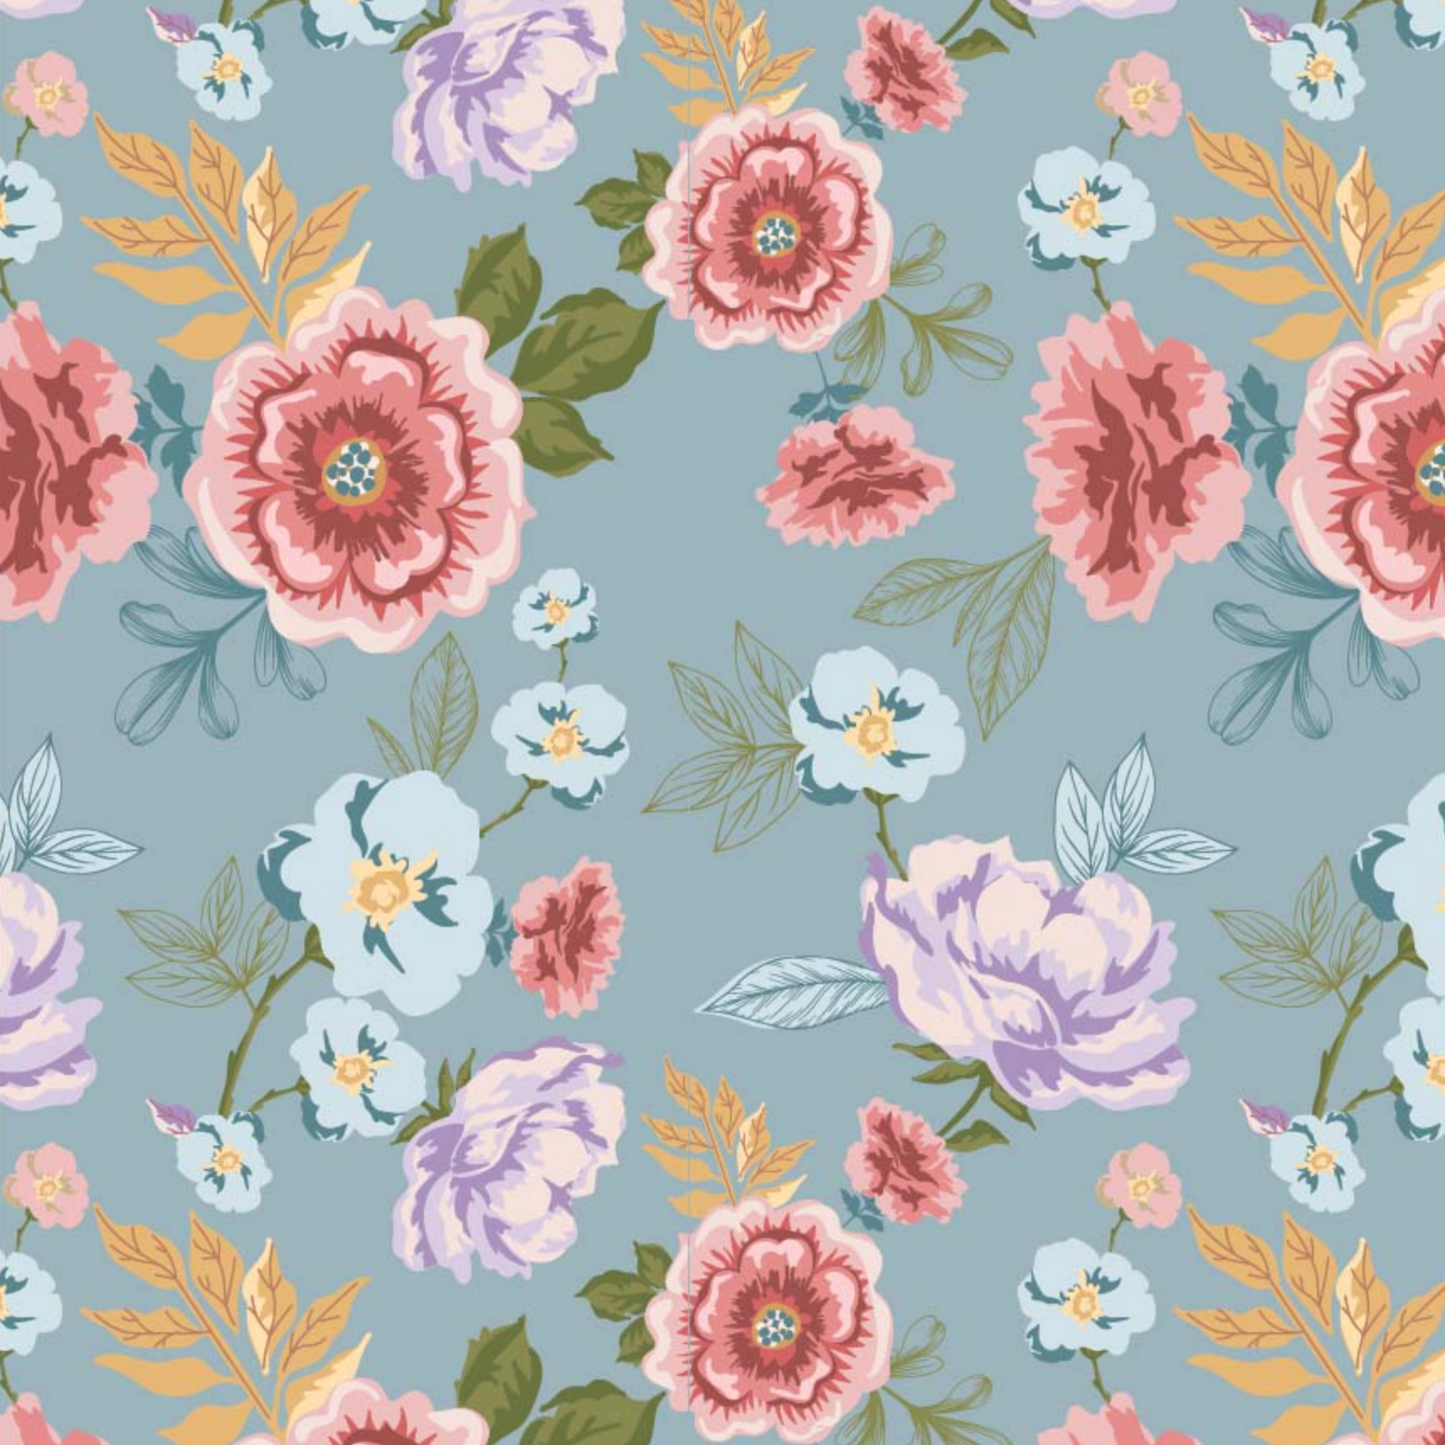 Nature Sings Fabric, Rose Garden, Blue, NS24122, sold by the 1/2 yard, *PREORDER